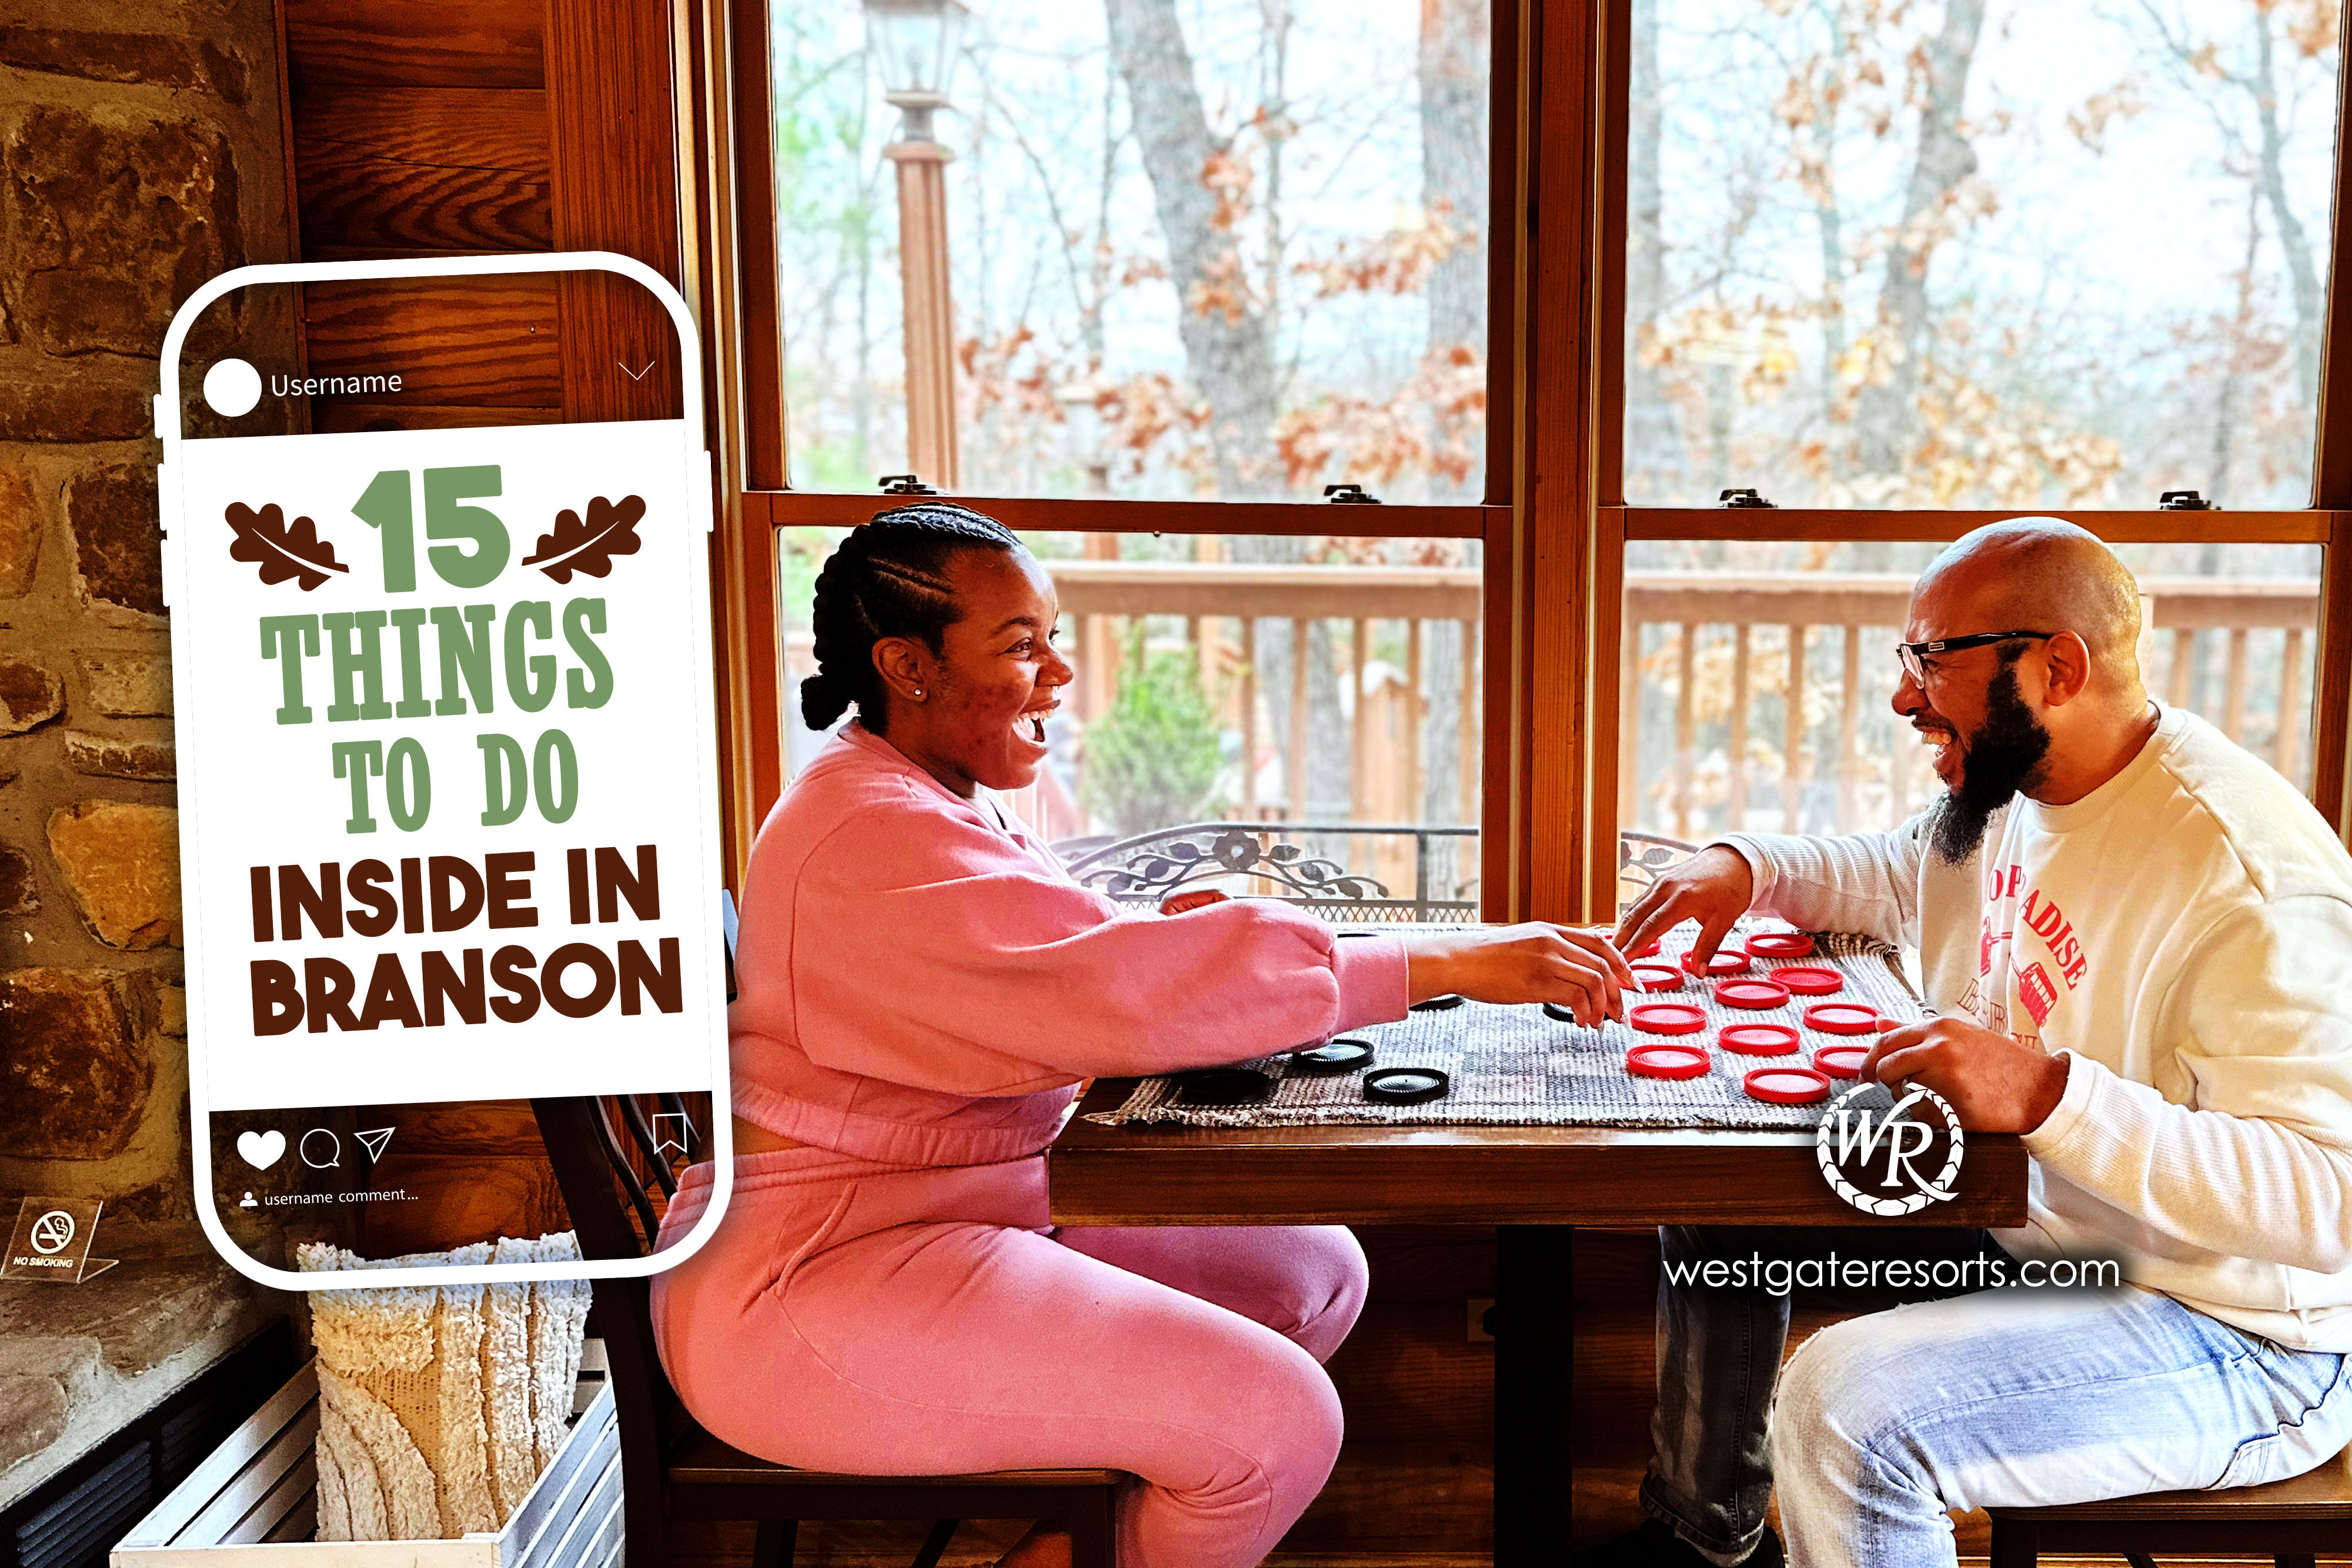 15 Things to do inside in Branson